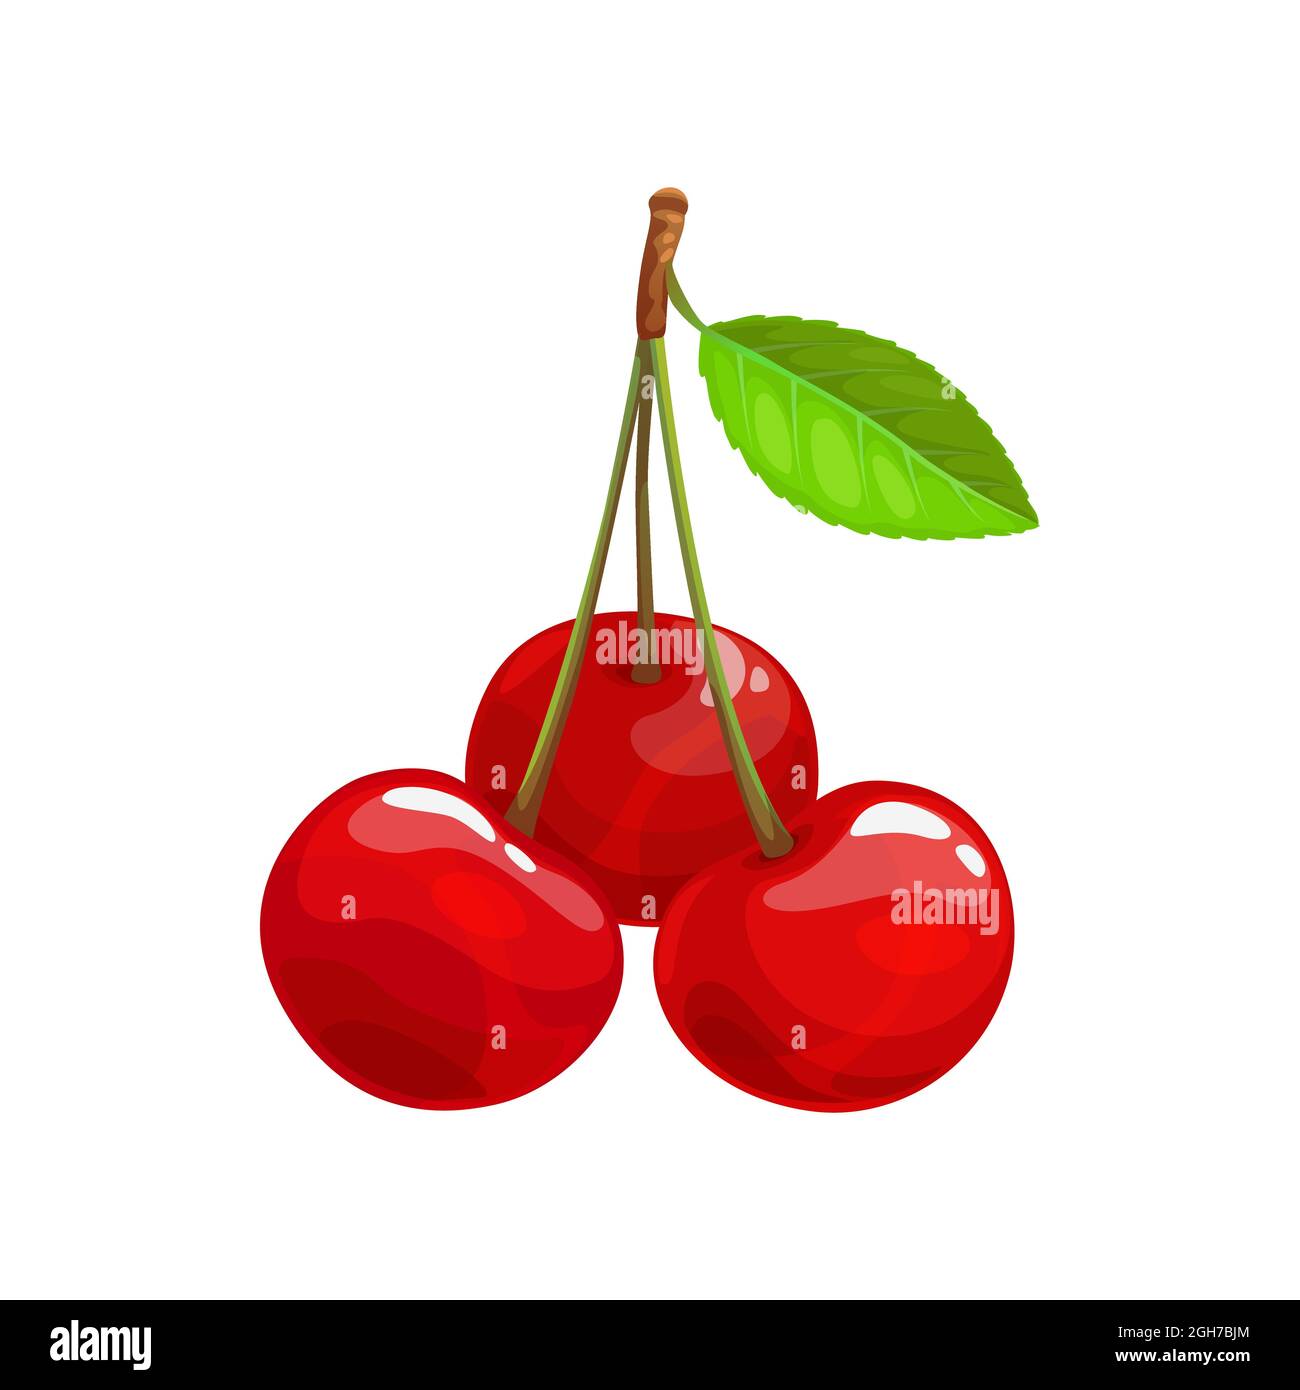 Are Cherries Berries? - Is This That Food